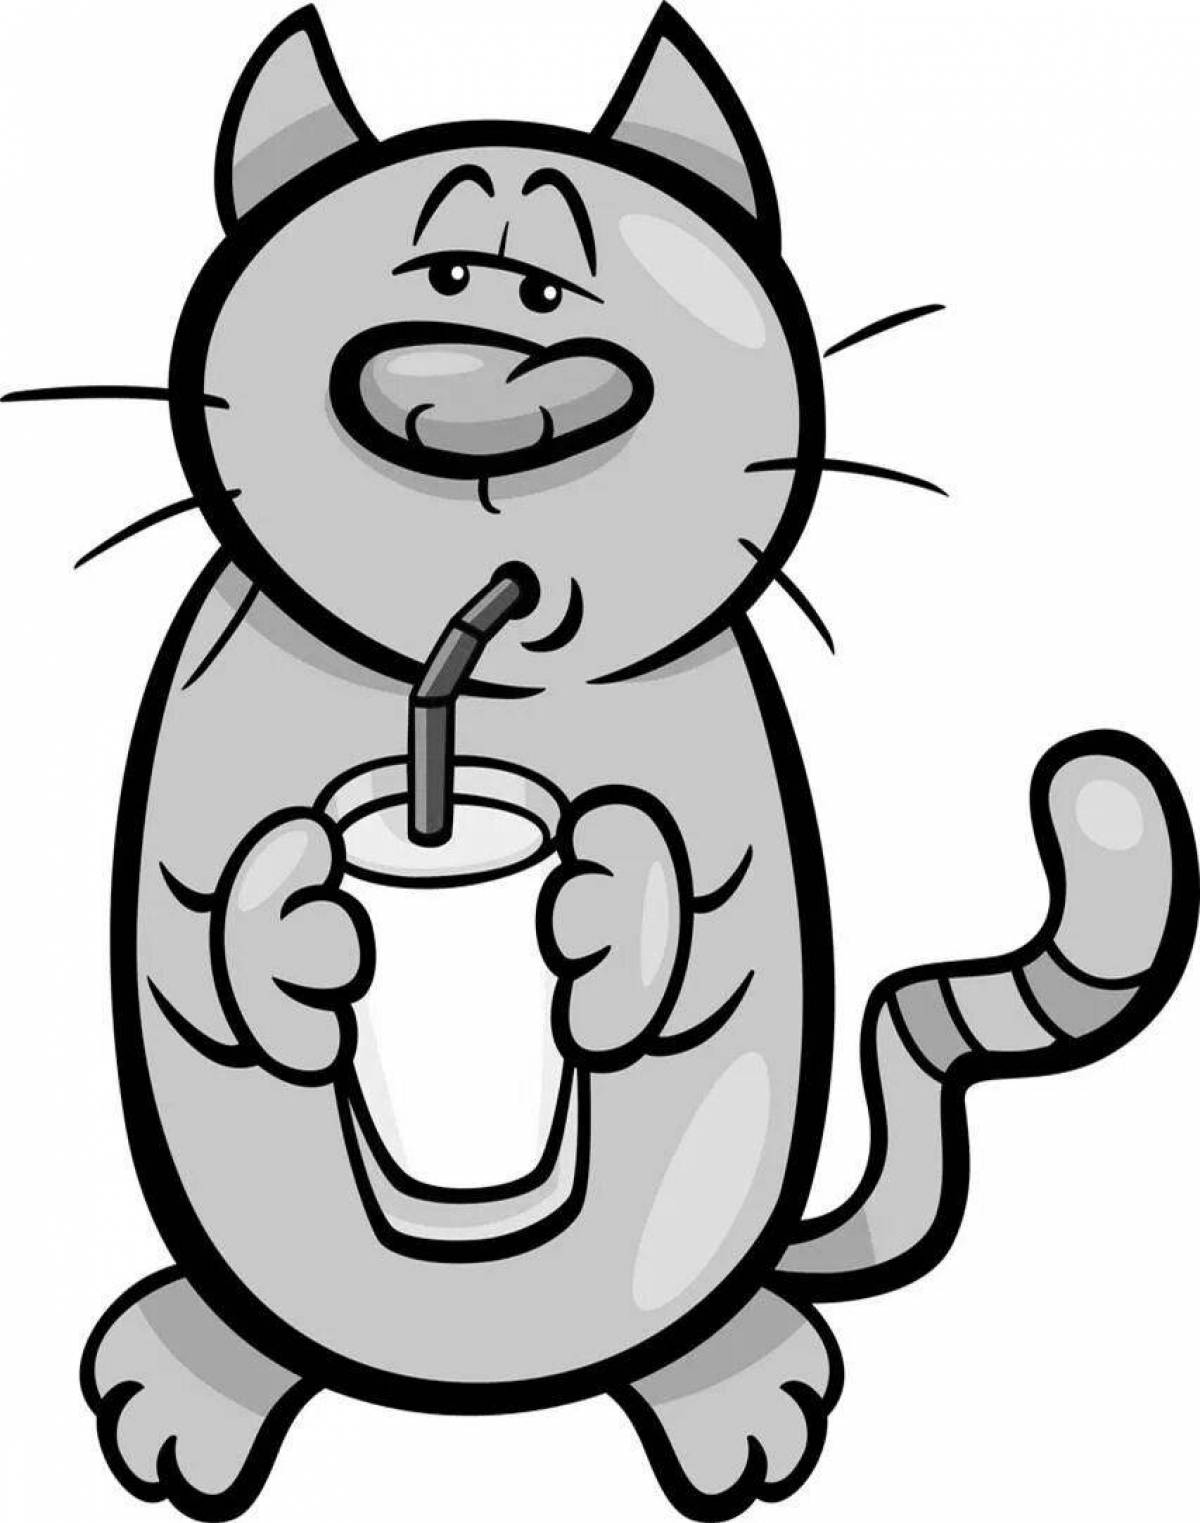 Coloring page adorable cat drinking milk